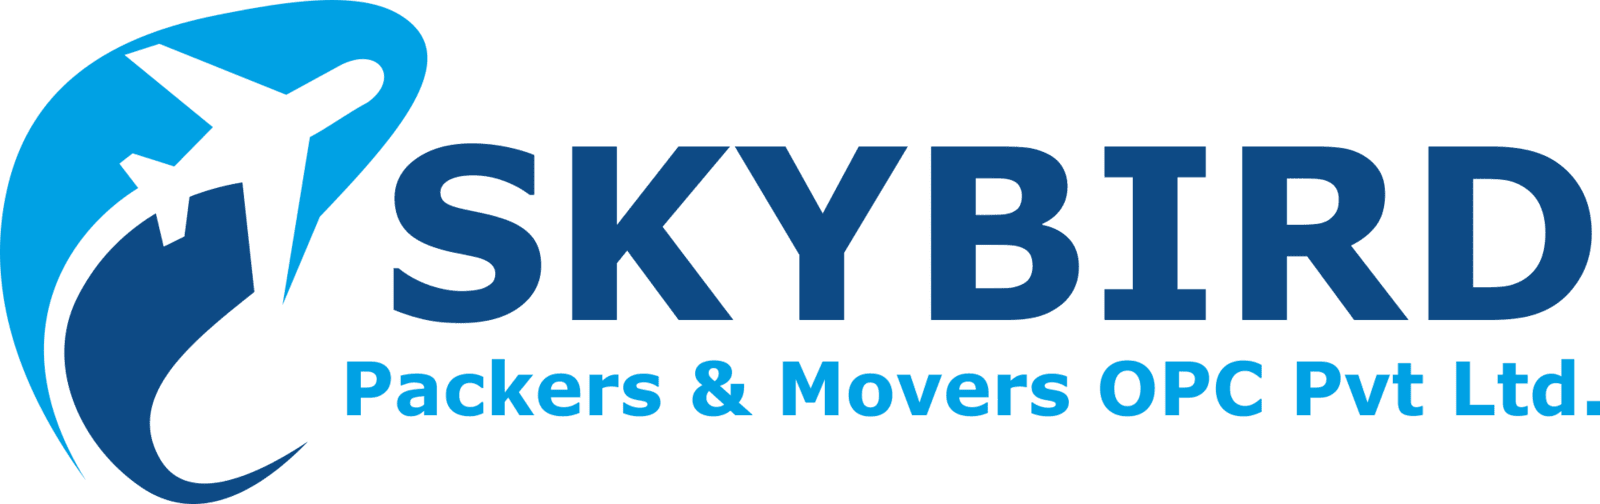 Skybird Packers and Movers Pvt Ltd